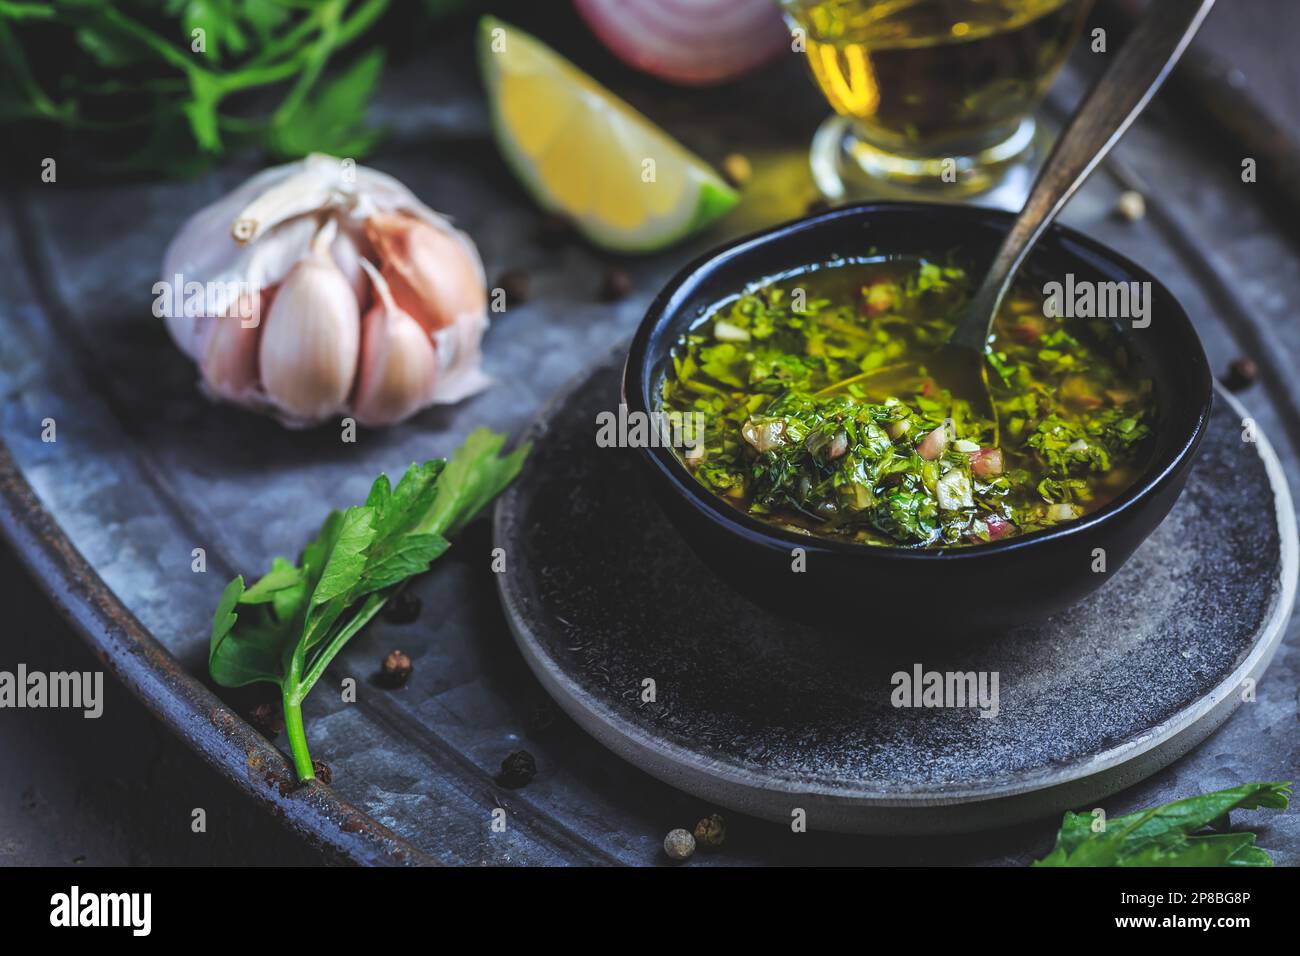 Chimichurri verde - traditional Argentine condiment, made from finely chopped parsley, minced garlic, olive oil, oregano, and wine vinegar Stock Photo